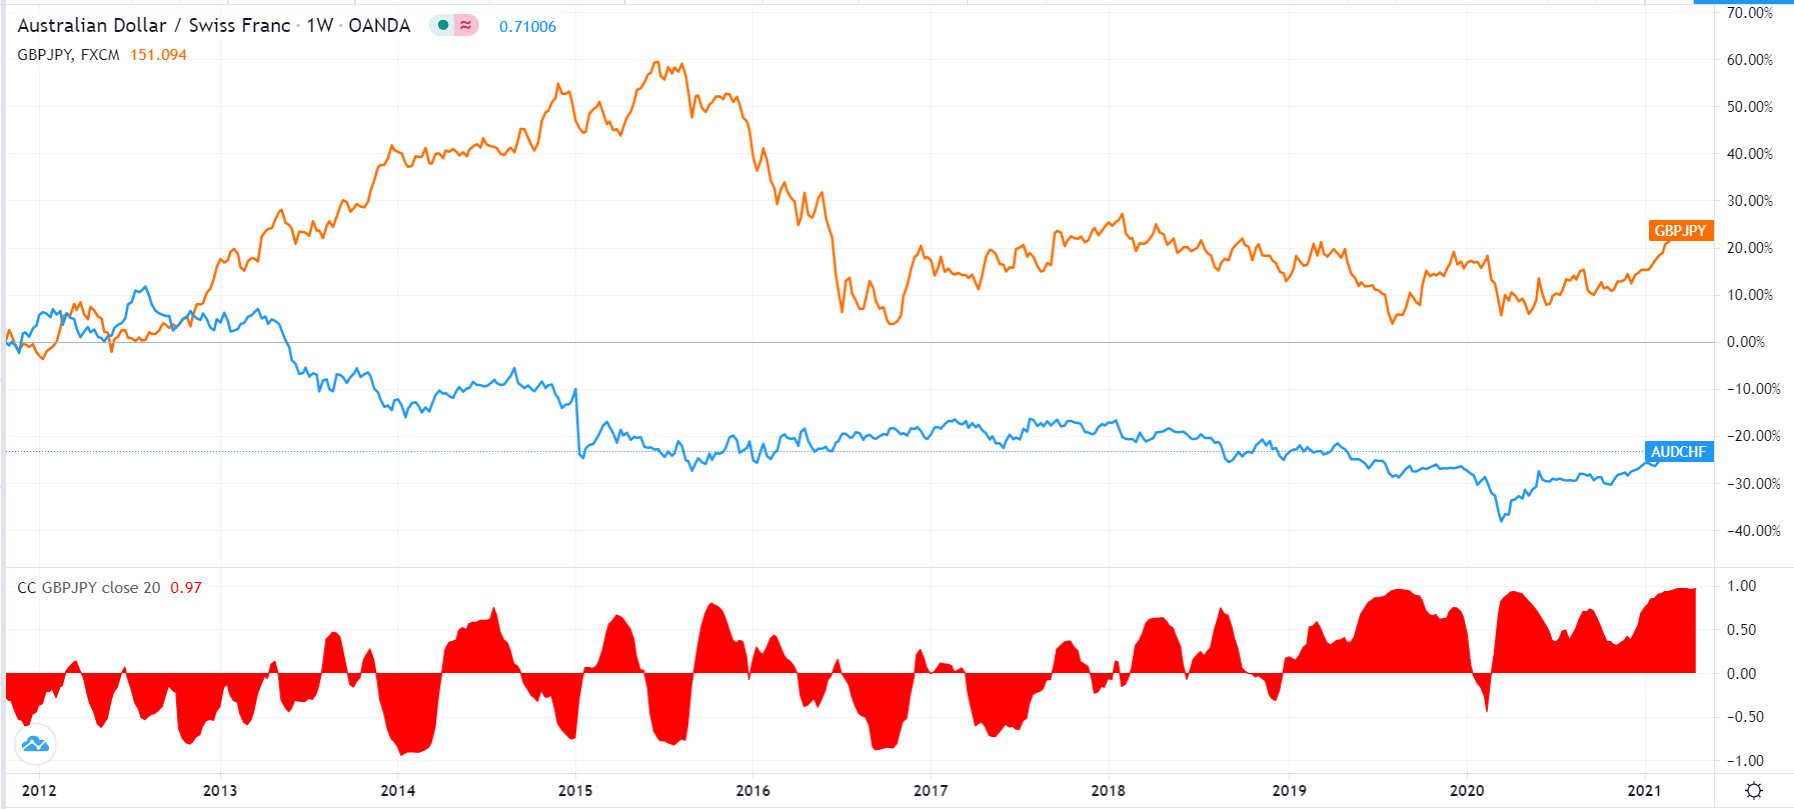 AUD/CHF and GBP/JPY correlation